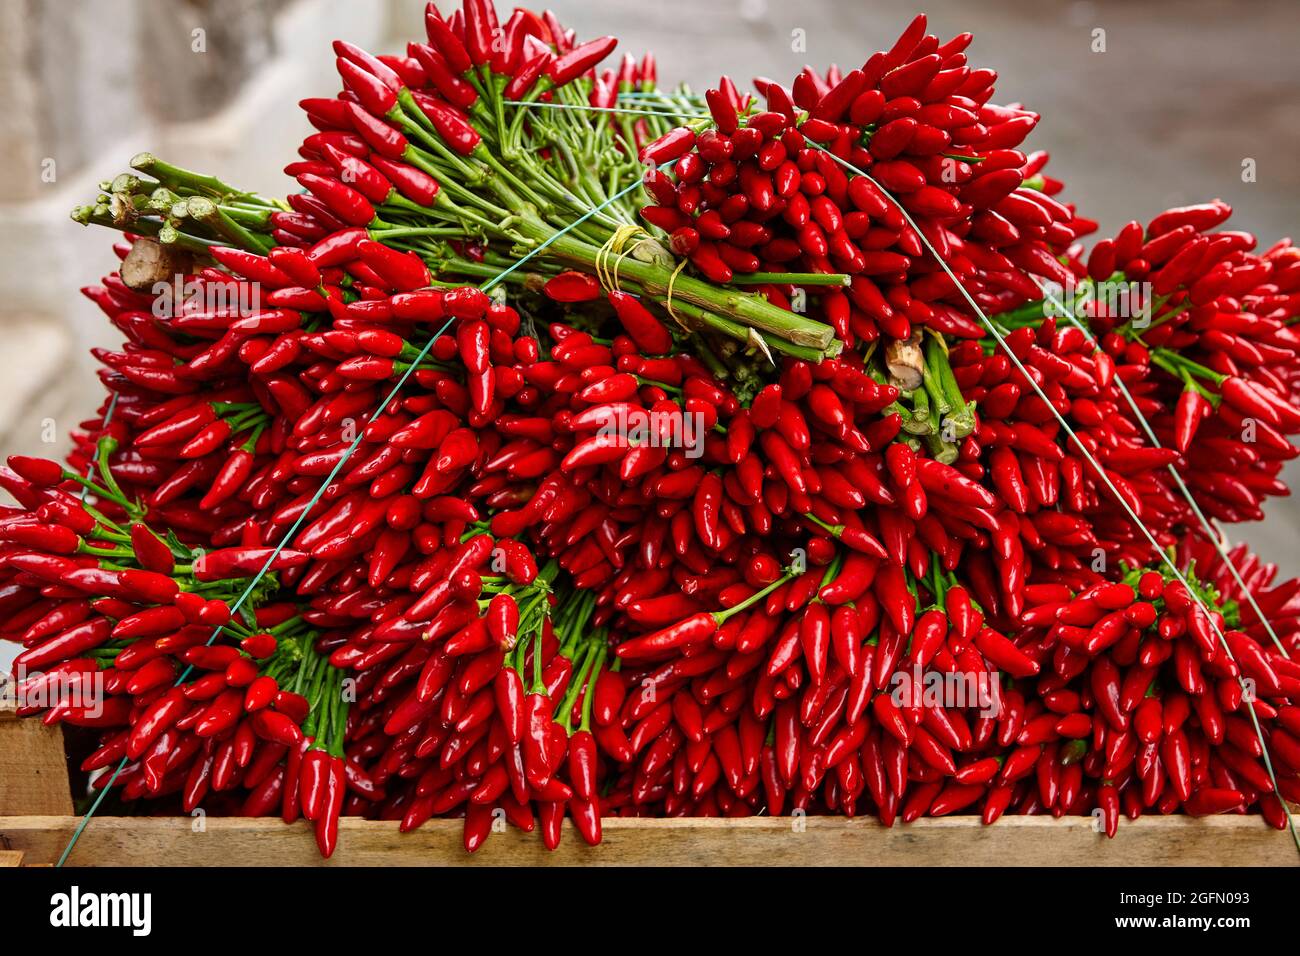 Pile of harvested red chili peppers on market stall Stock Photo